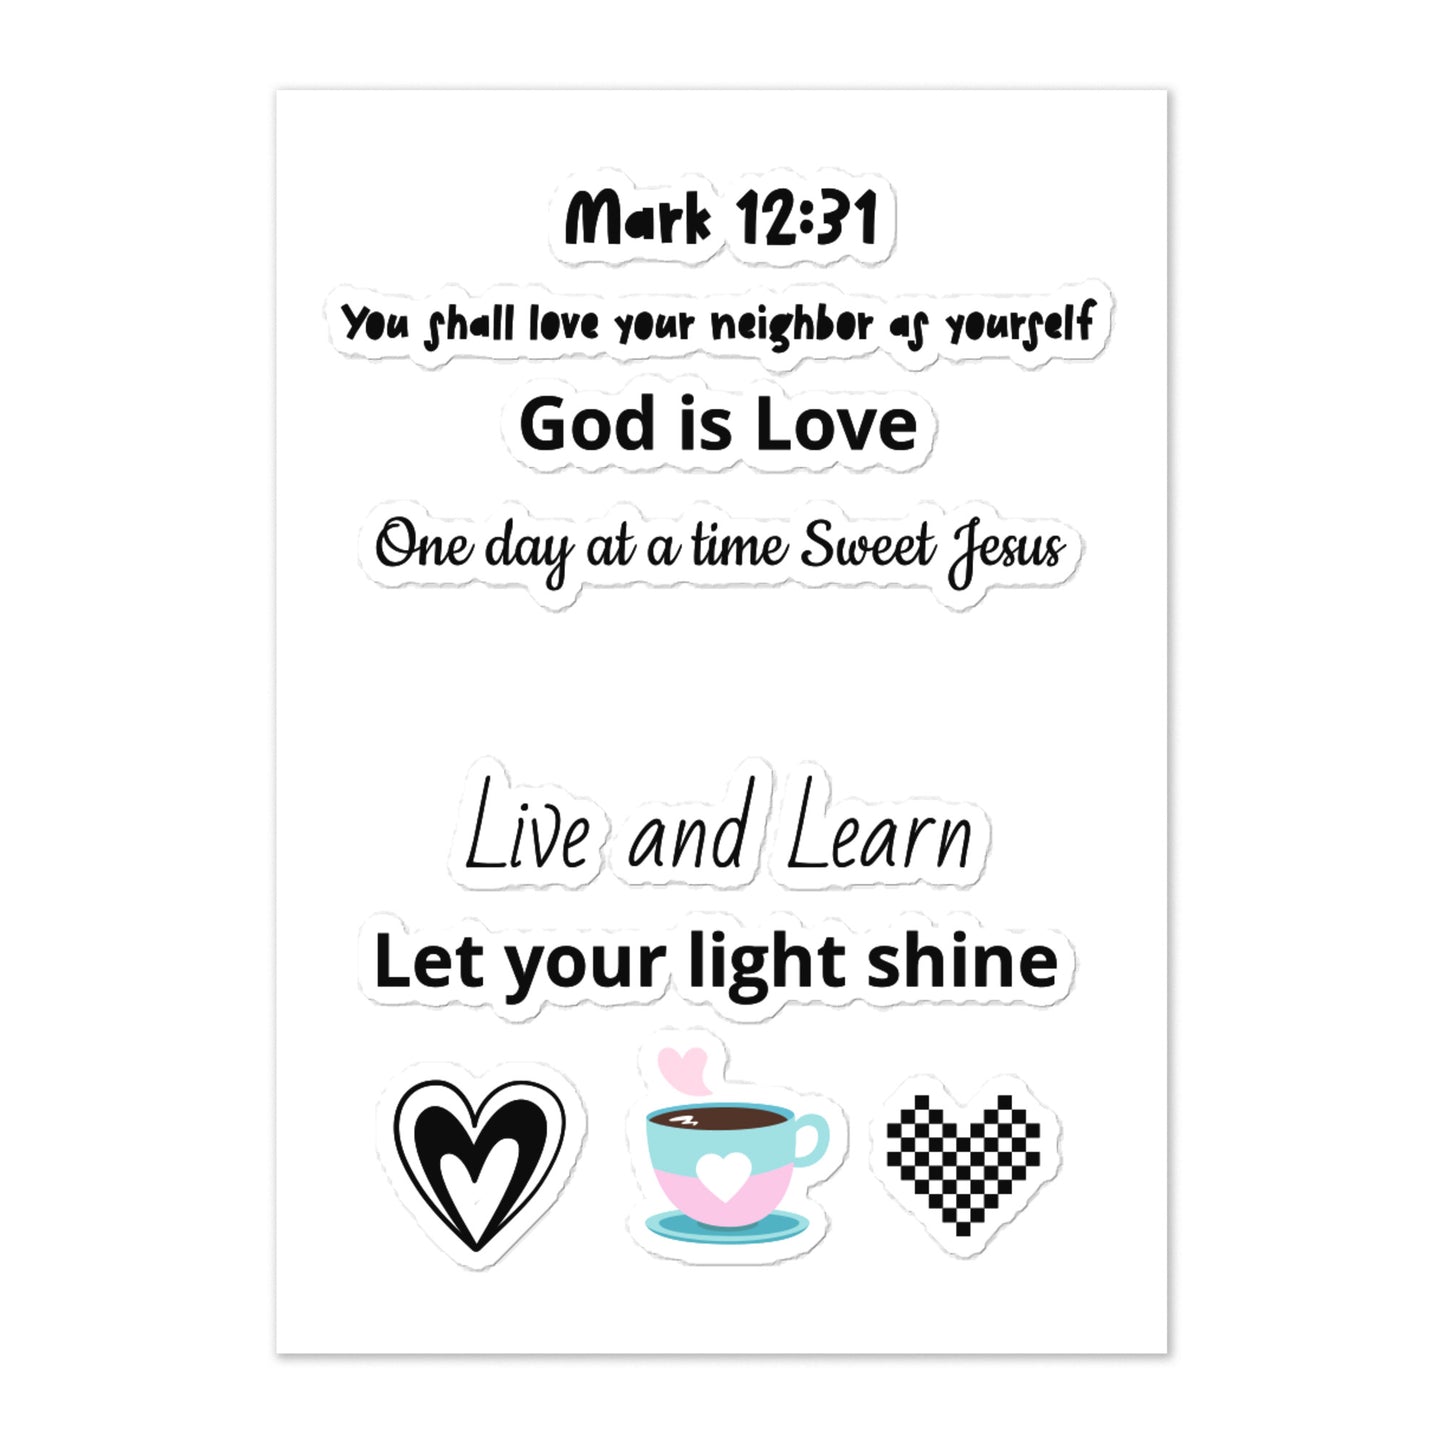 Love Your Neighbor As Yourself Sticker Sheet